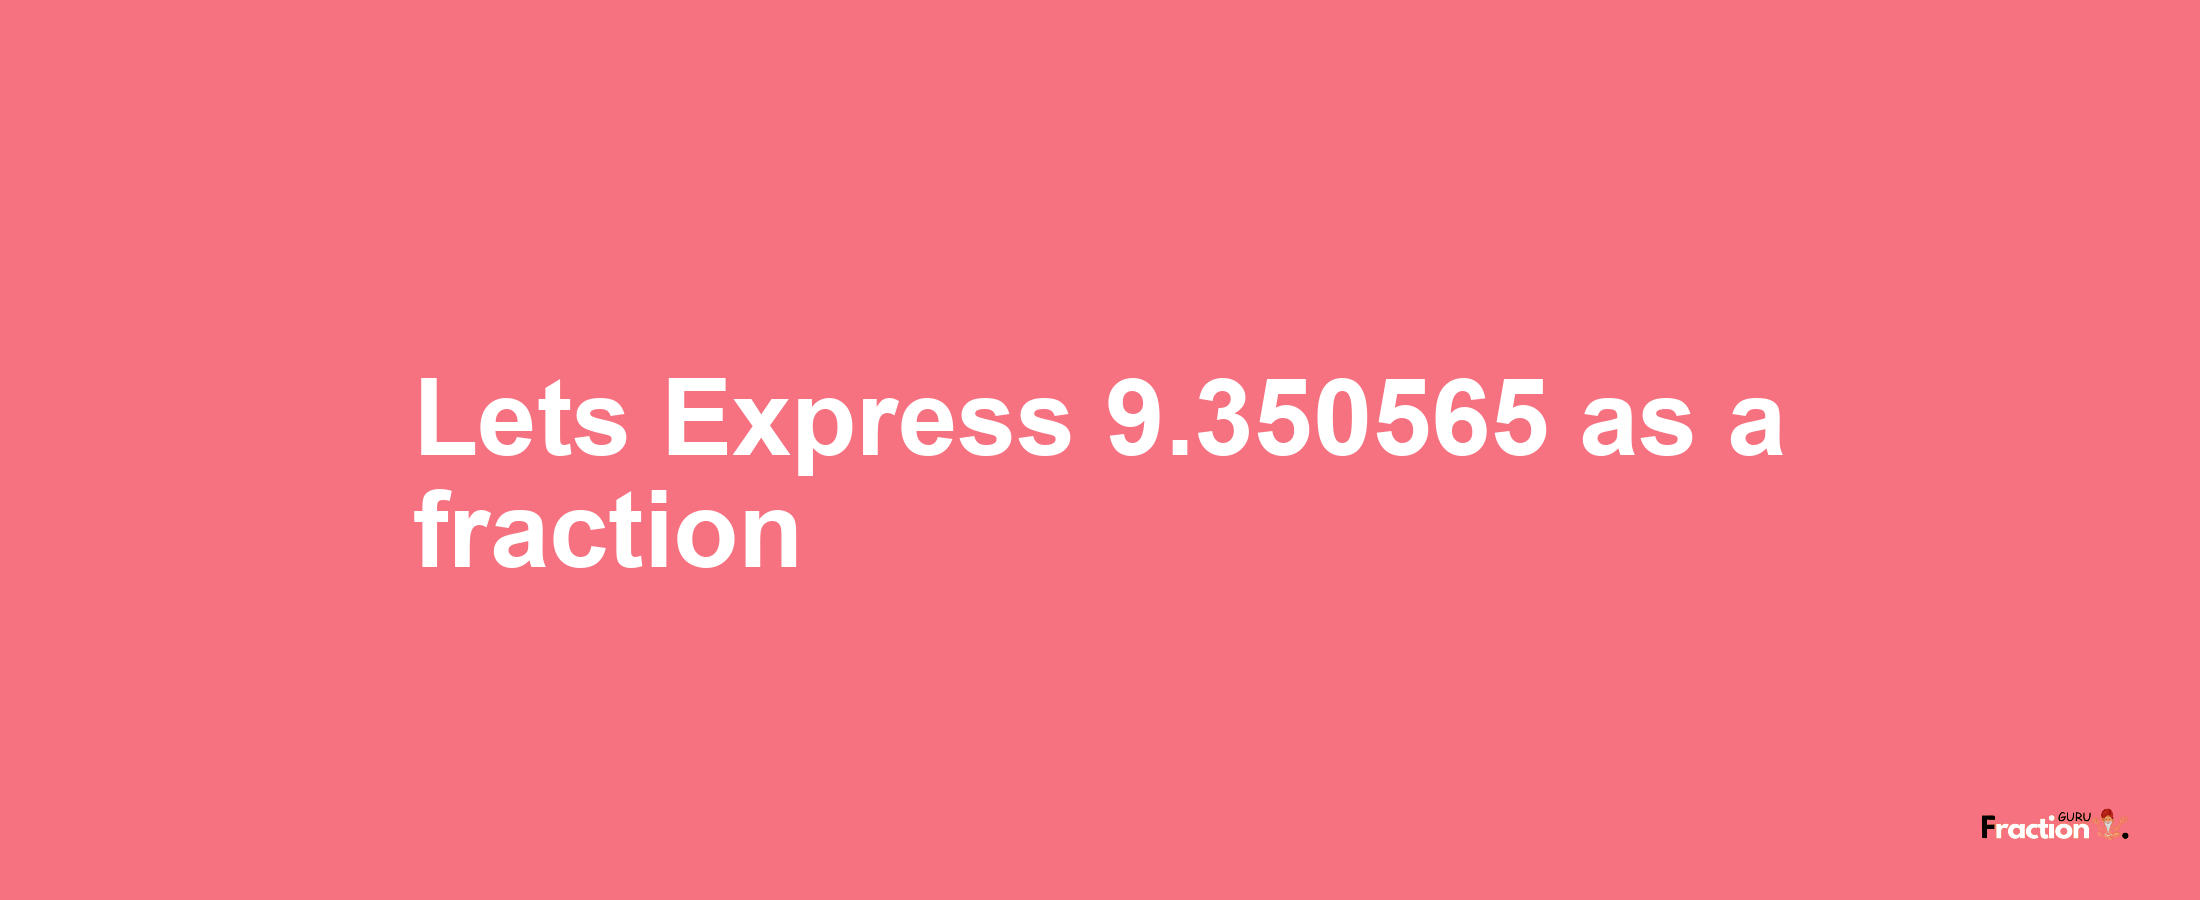 Lets Express 9.350565 as afraction